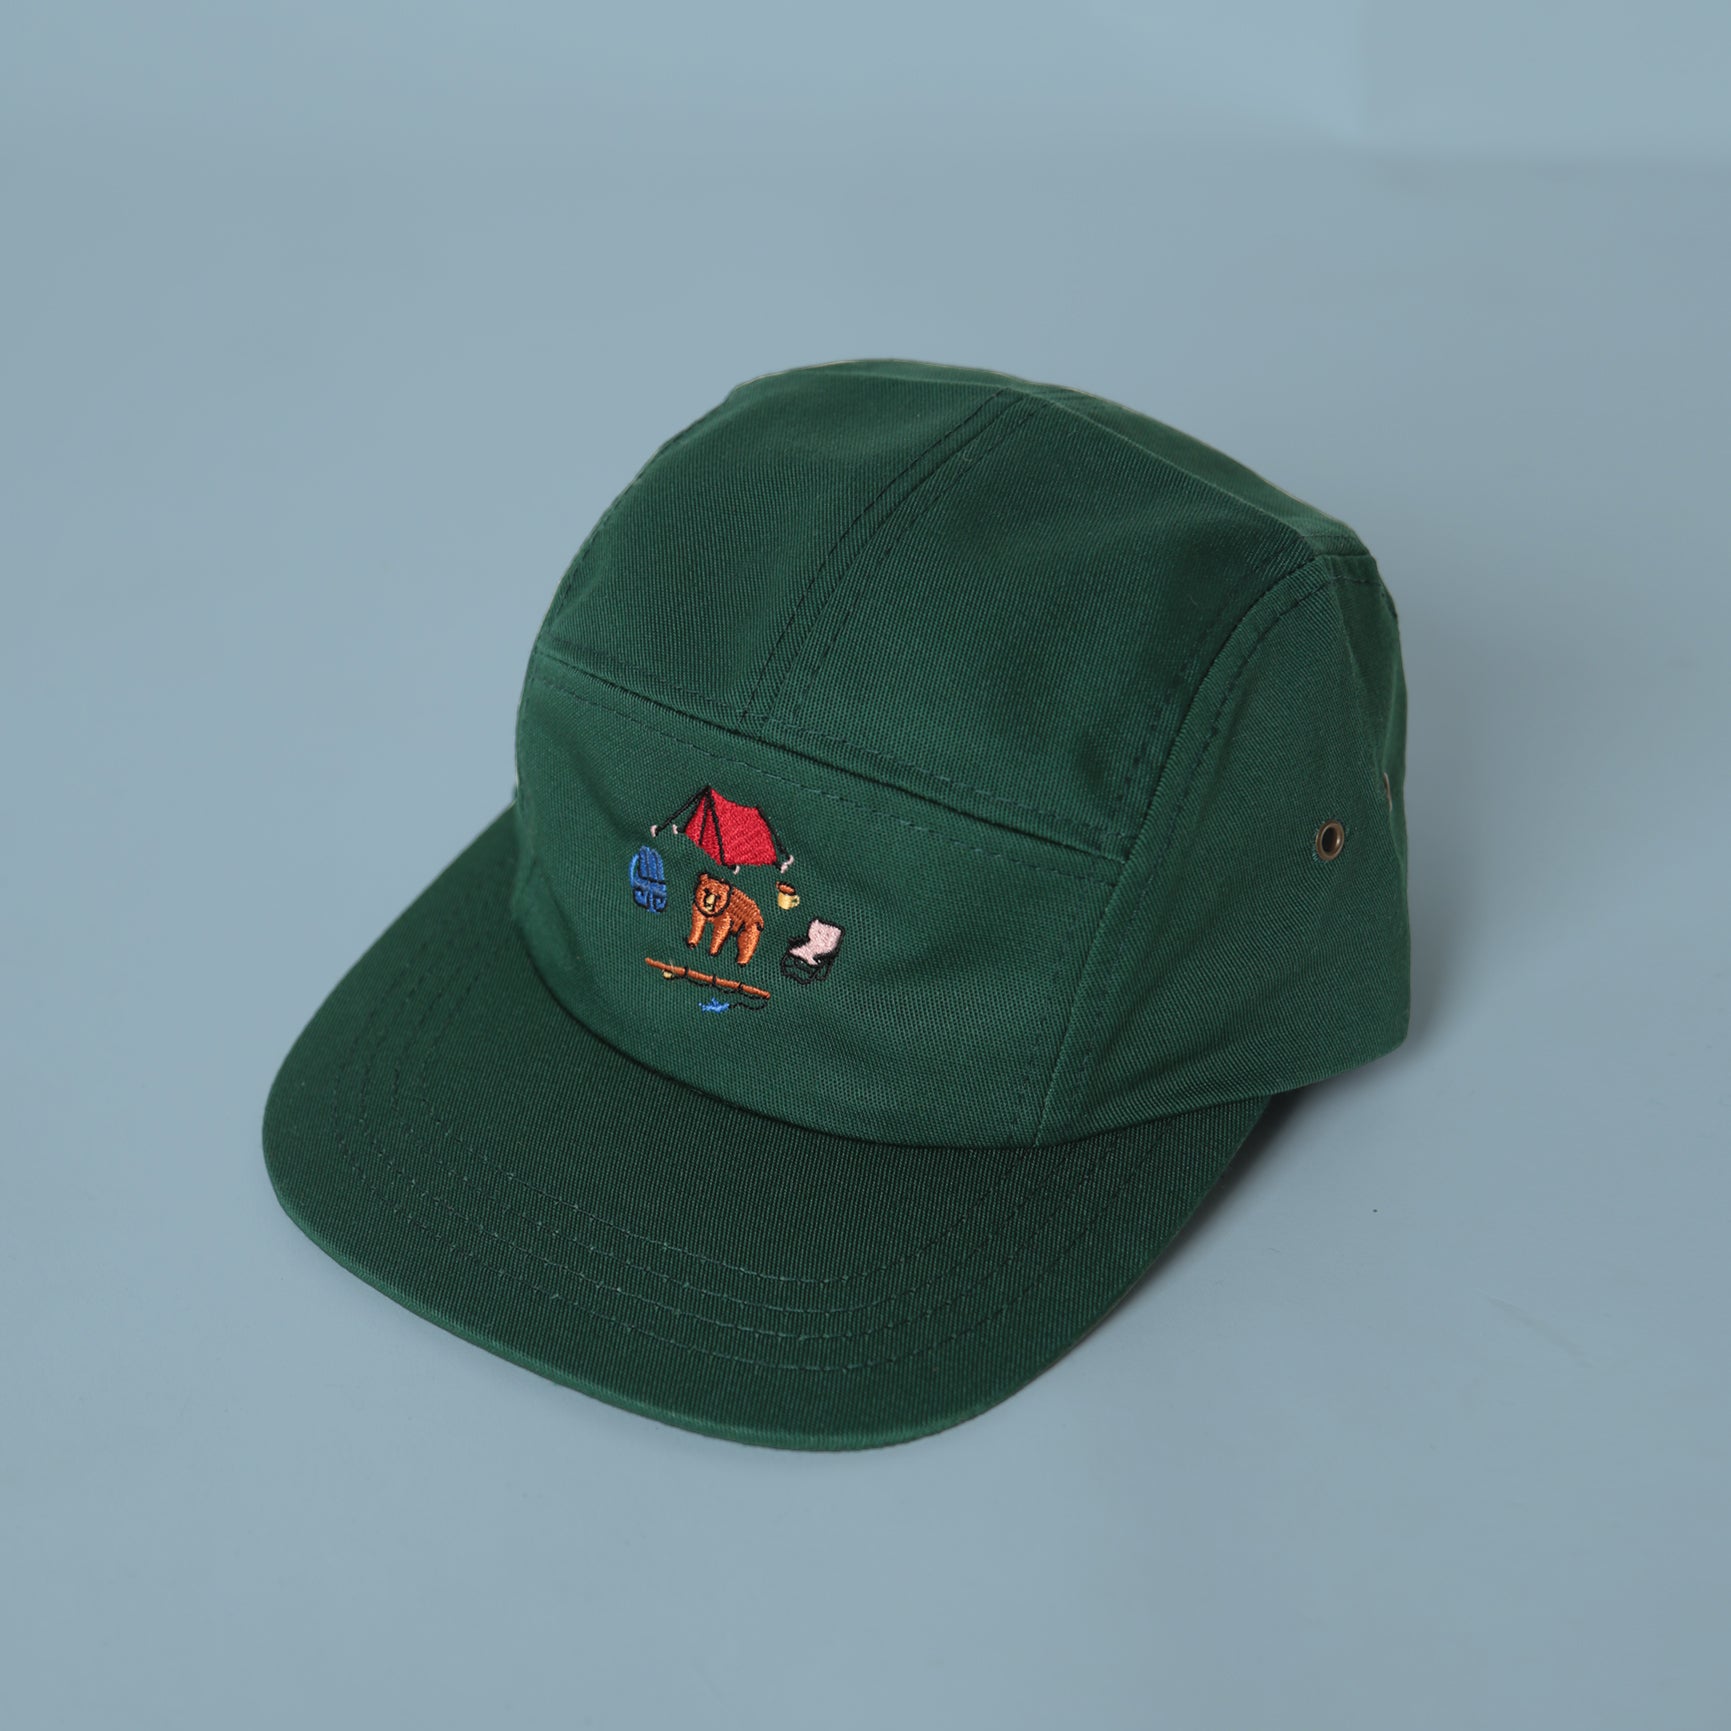 5 Panel - Forest - Camp Bear Embroidery - CAMP Series